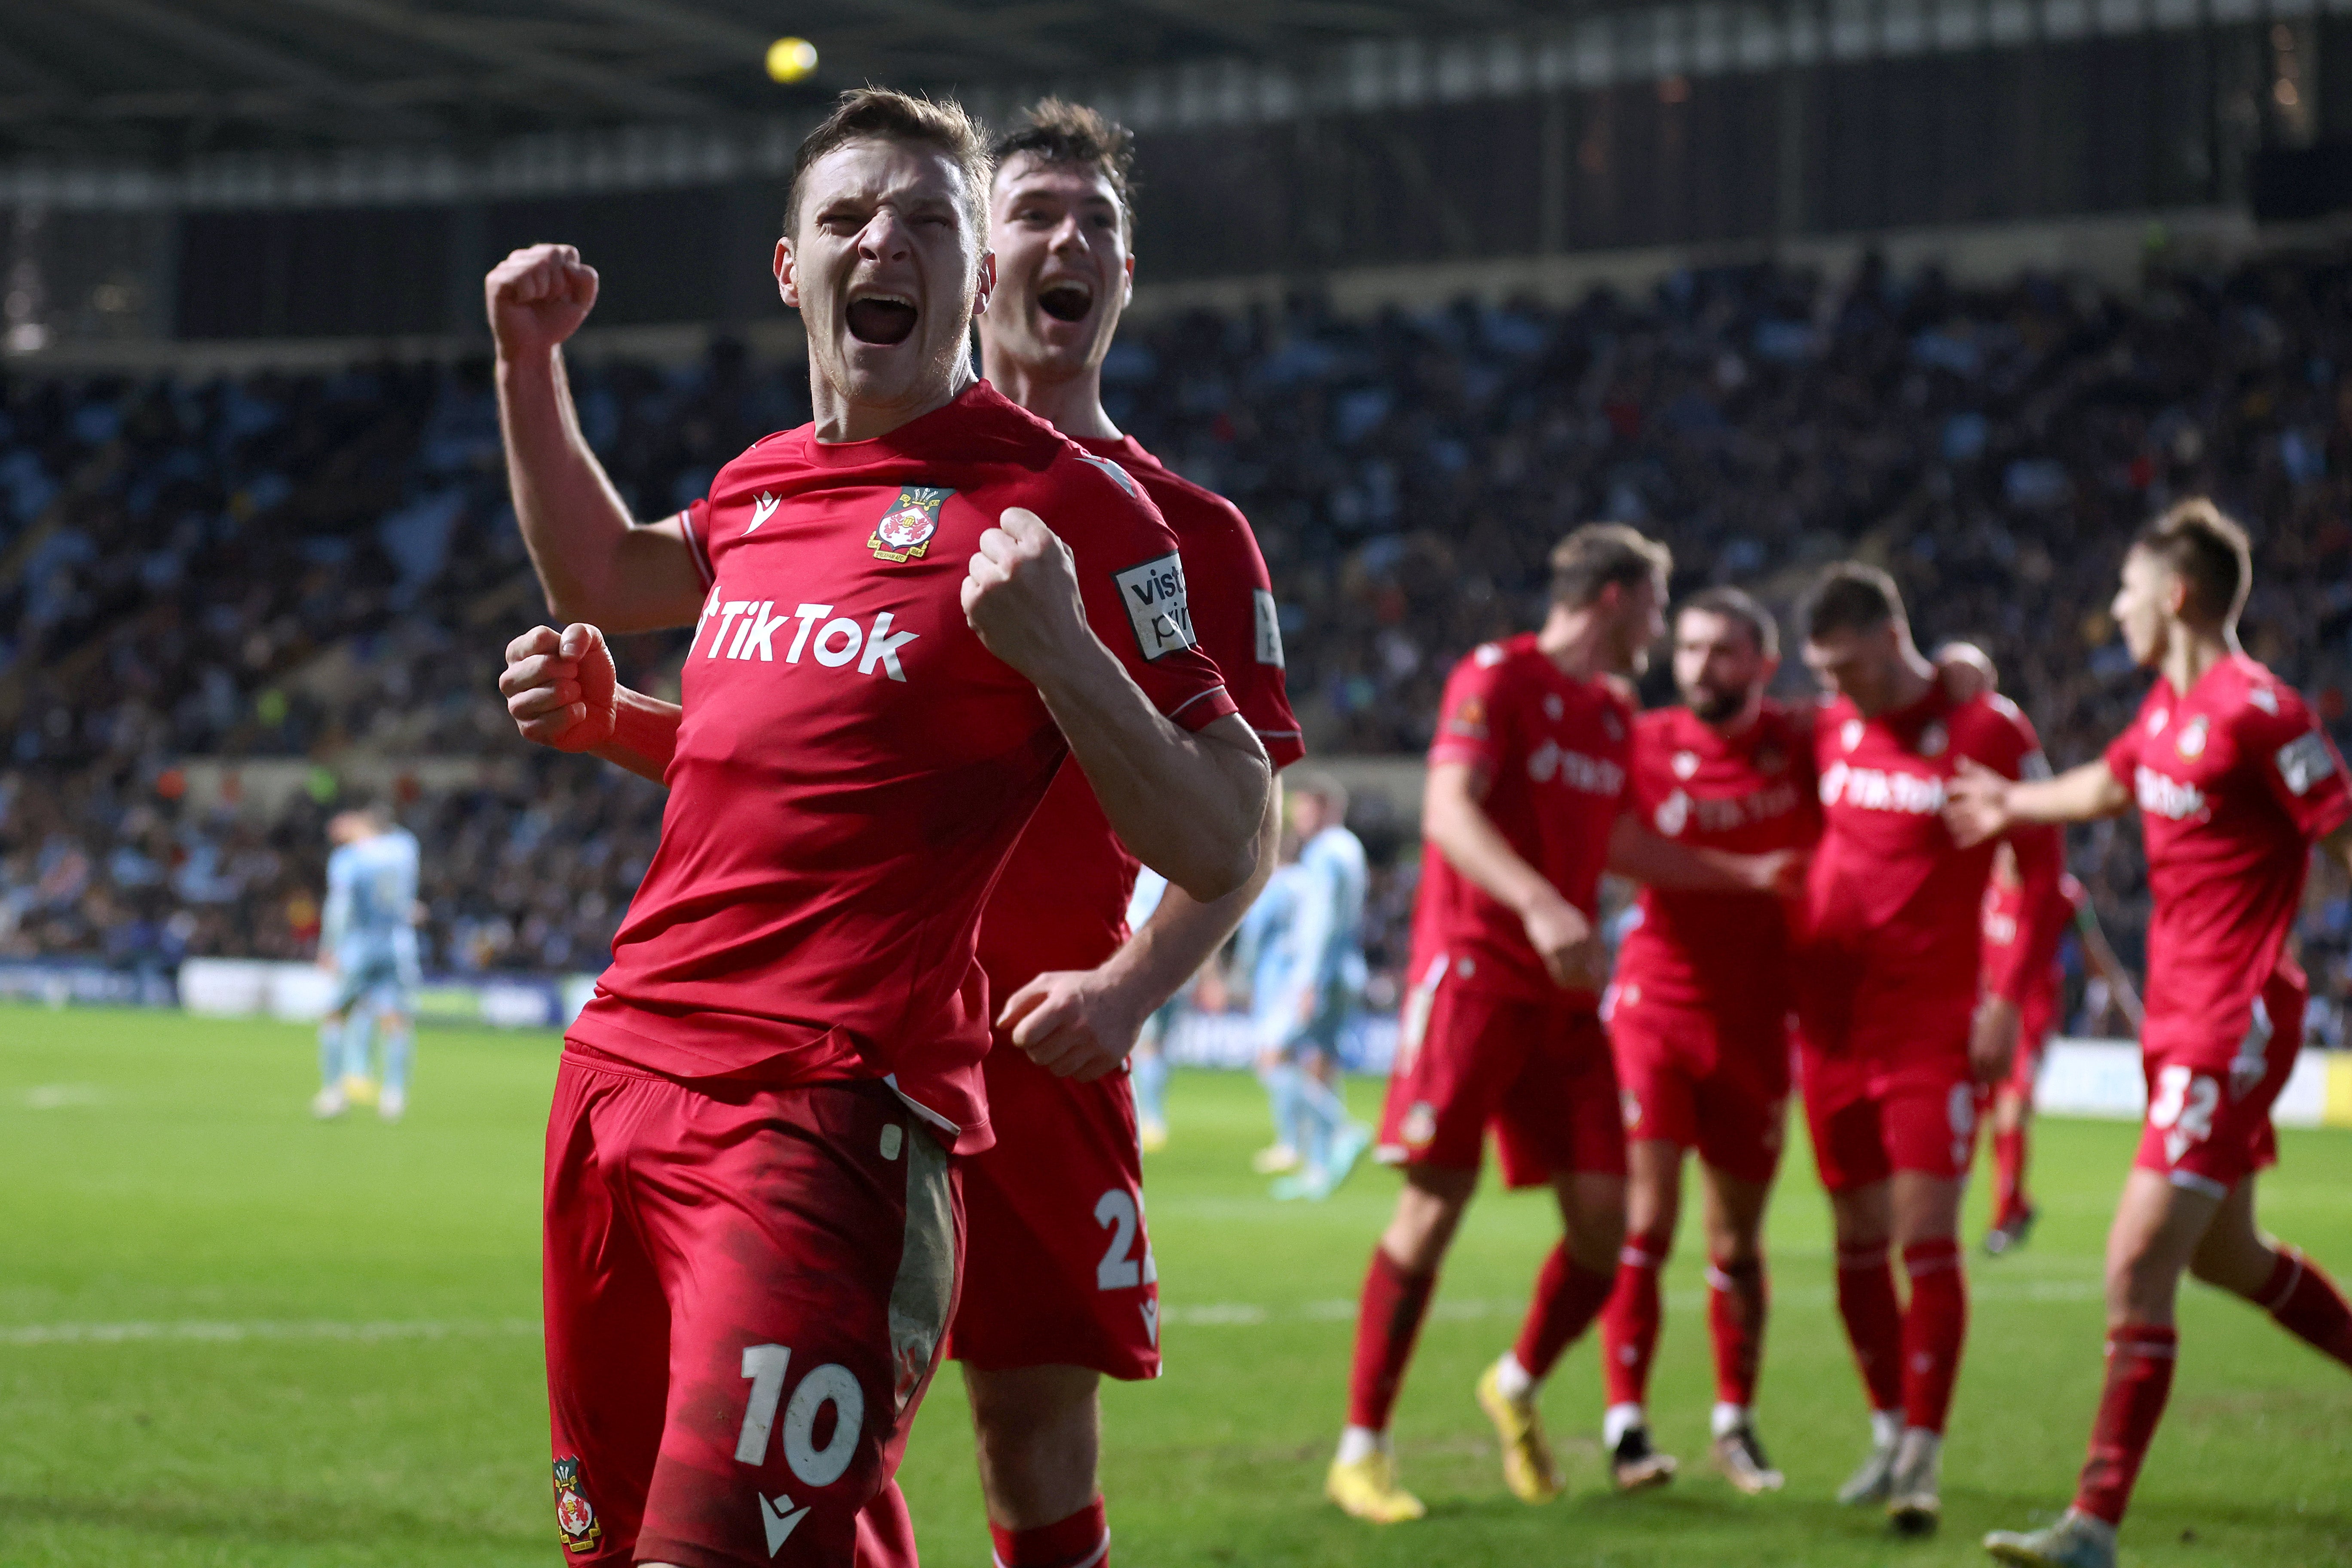 Wrexham’s Thomas O’Connor celebrates during their dramatic win over Coventry City